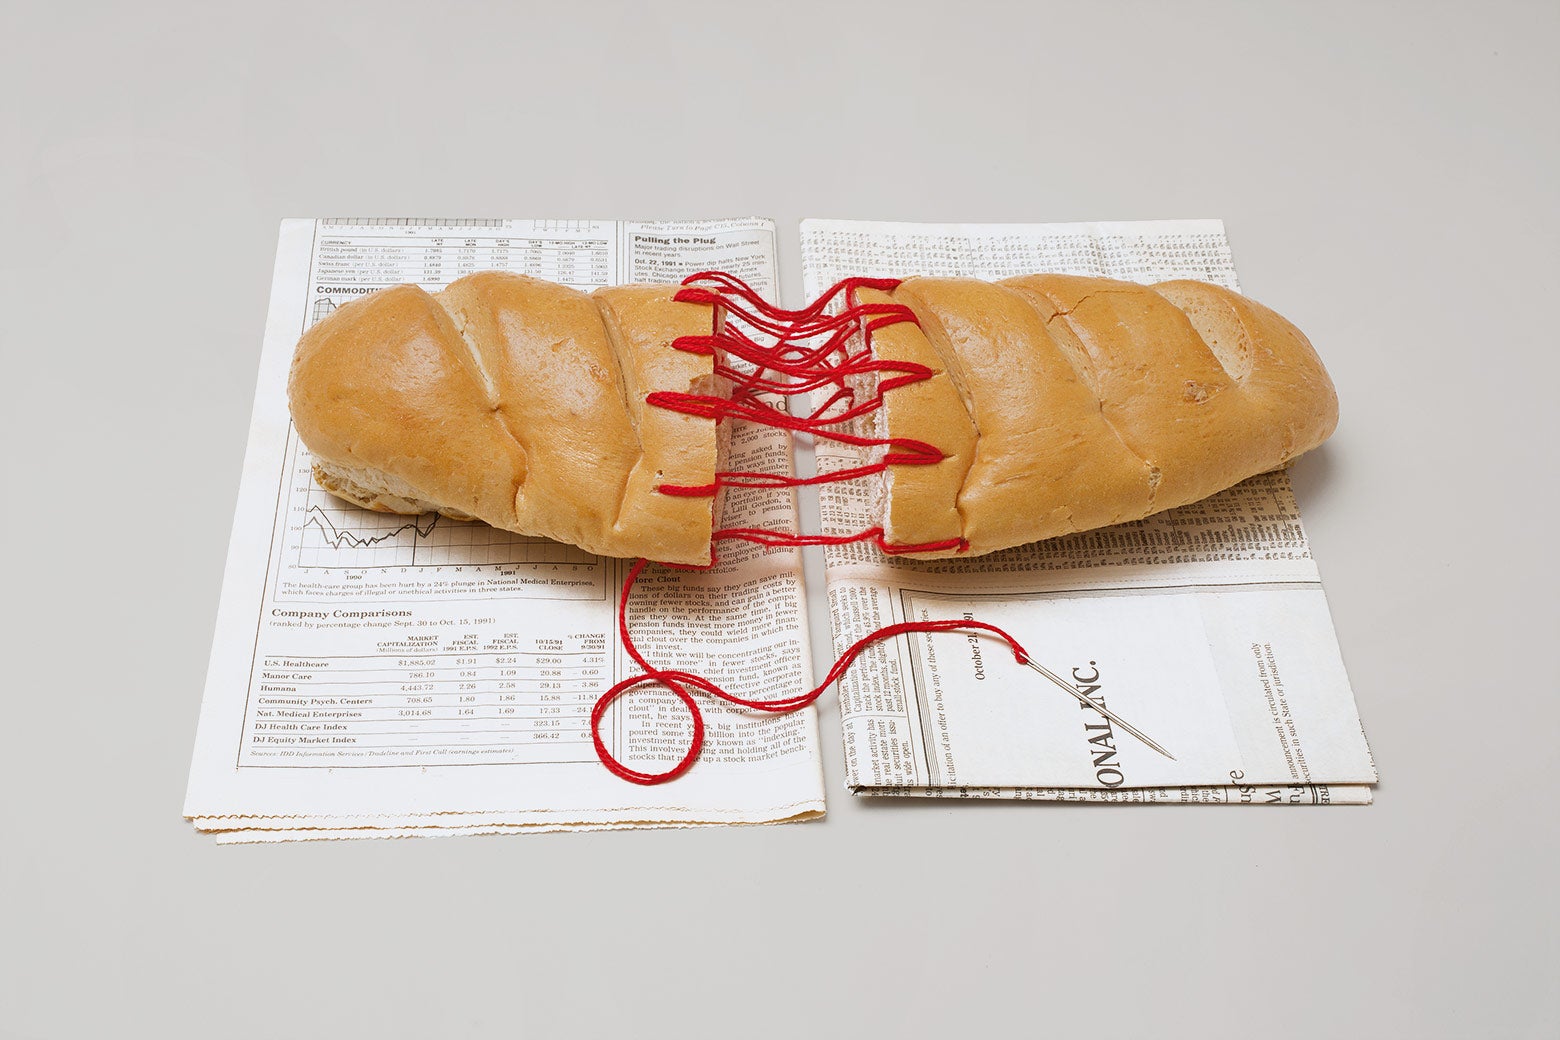 A sculpture of a loaf of bread stitched together with red string.